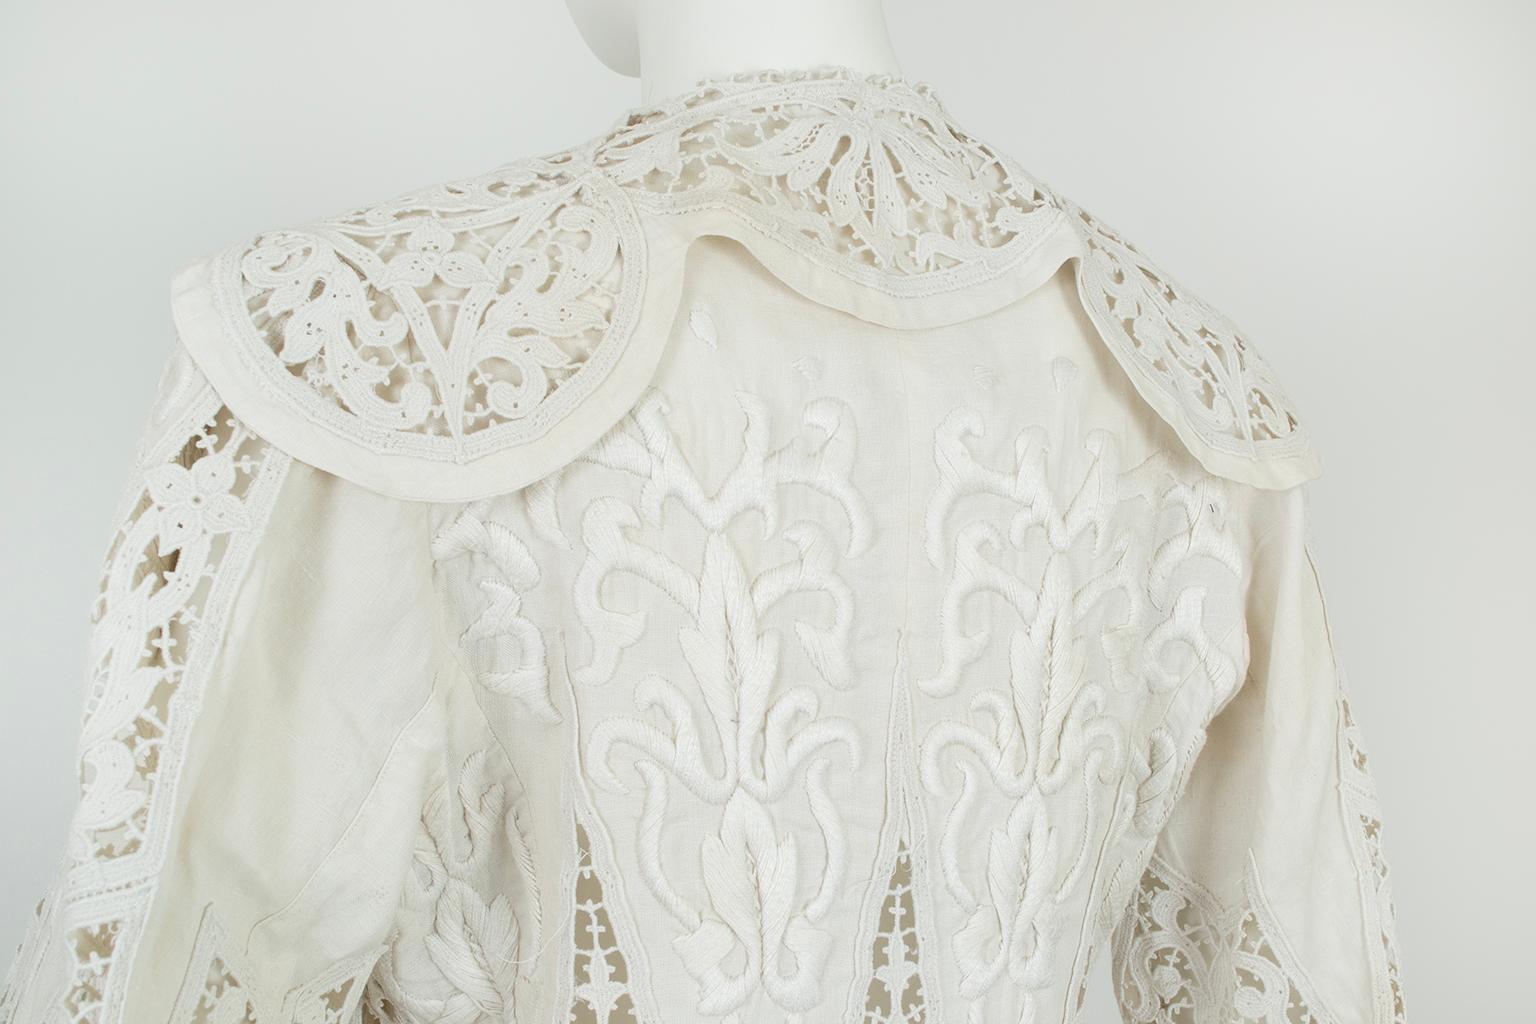 Edwardian White Irish Crochet and Cotton Walking or Wedding Suit – L, 1900s For Sale 6